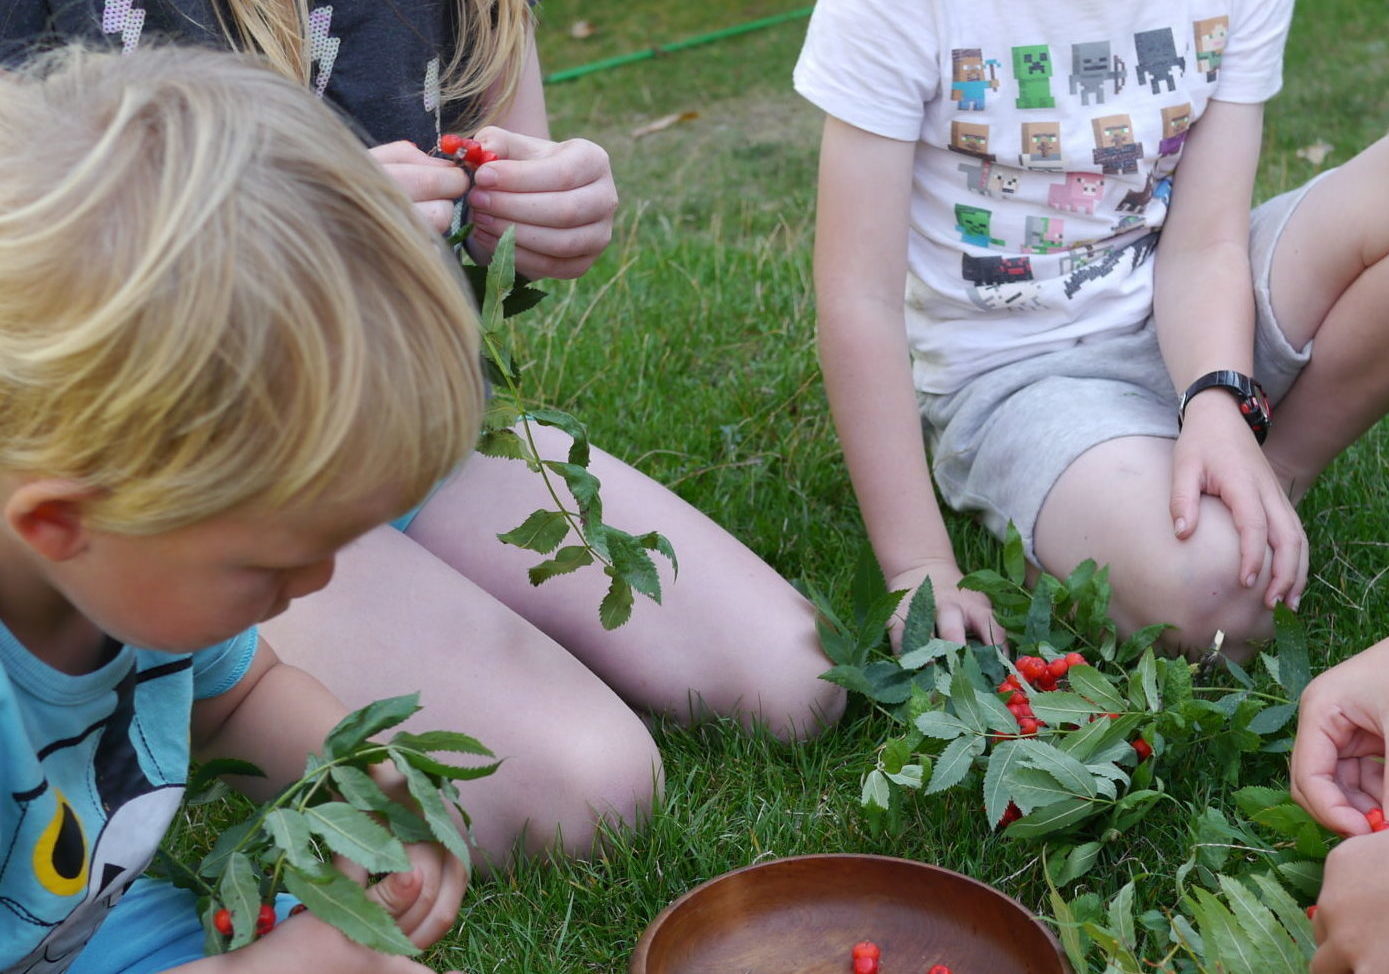 4 children of different ages sitting on grass picking red berries off leafy twigs and putting them in a wooden bowl